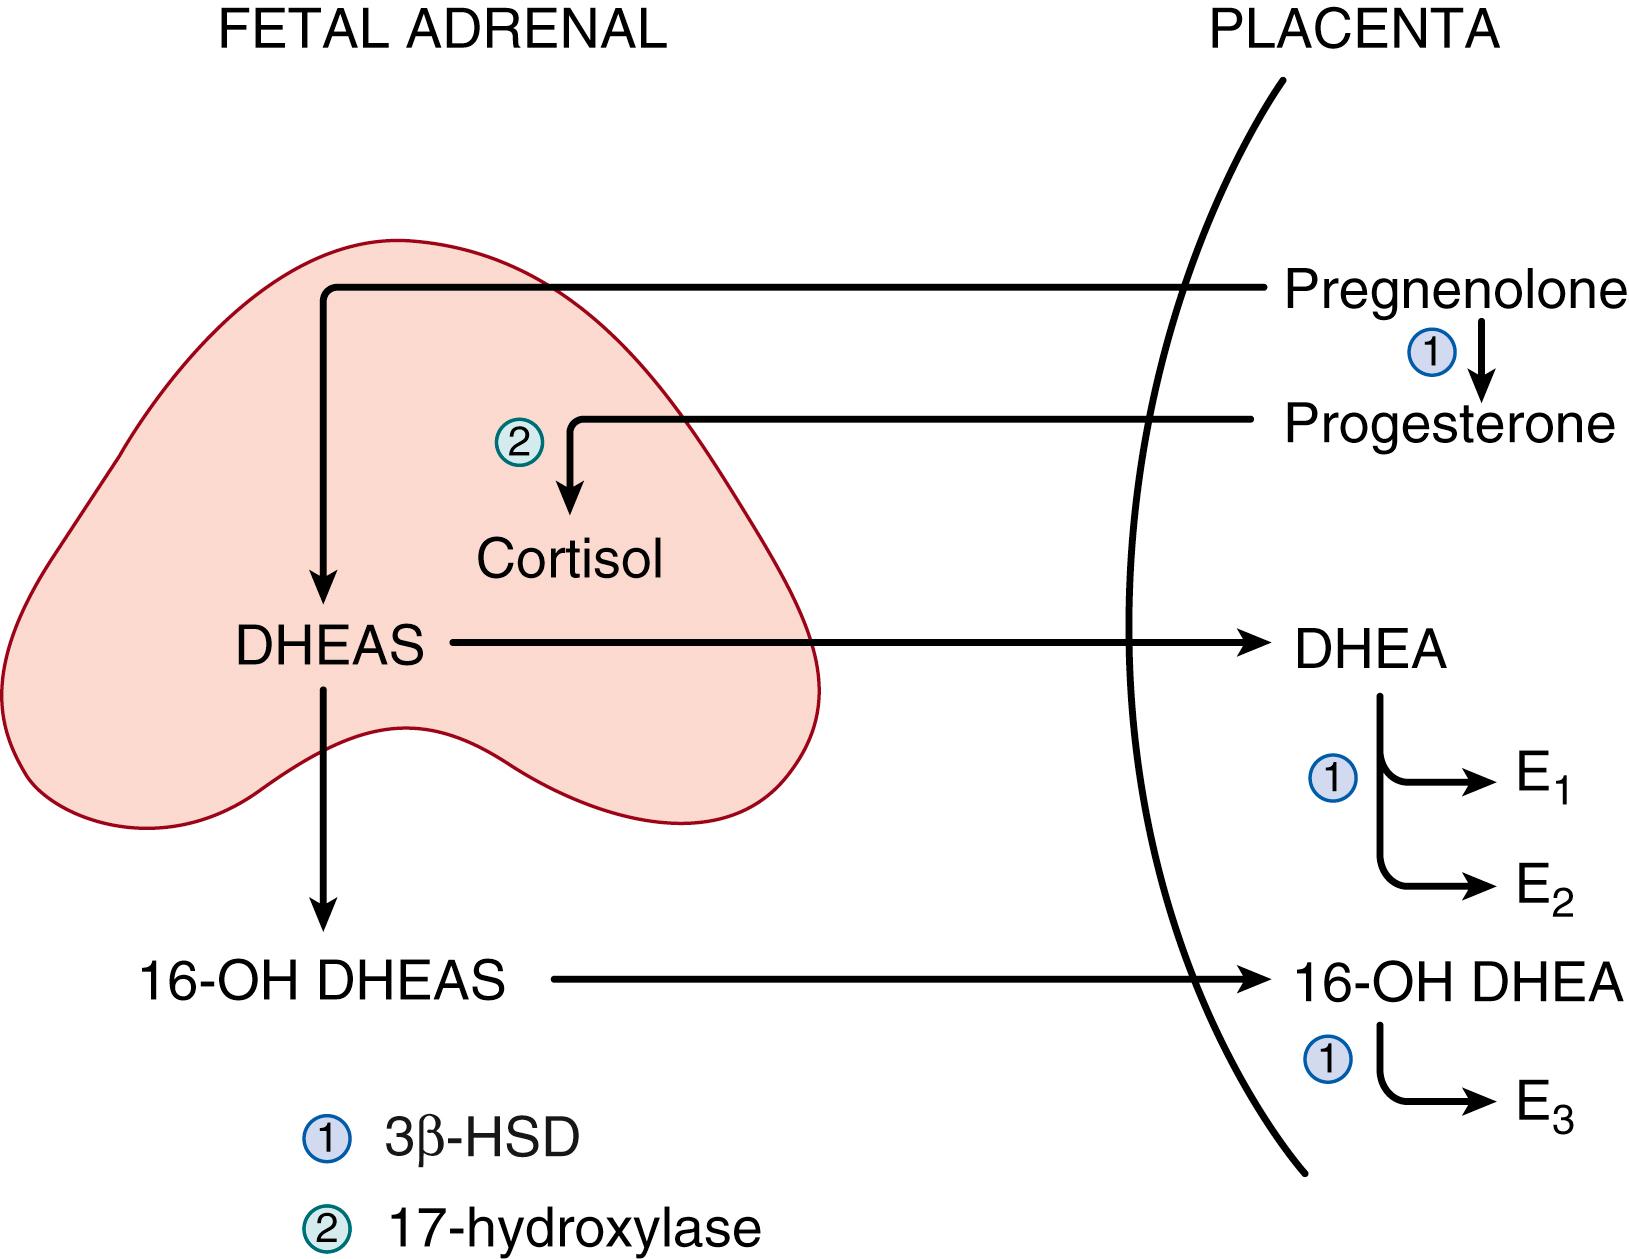 Fig. 144.3, Diagrammatic representation of the fetoplacental unit composed of the fetal adrenal cortex and the placenta. The placenta is deficient in 17-hydroxylase activity and cannot synthesize estrogens from progesterone. The fetal adrenal cortex has low 3β-hydroxysteroid dehydrogenase (3βHSD) and Δ4,5 isomerase activity and cannot synthesize progesterone. Sulfokinase activity is high in fetal adrenal tissue, and steroid sulfatase activity is high in placental tissue. Thus the placenta produces progesterone, which is predominantly converted to dehydroepiandrosterone (DHEA) by the fetal adrenal cortex; the DHEA can be sulfated to form dehydroepiandrosterone sulfate (DHEAS) . Part of this is 16-hydroxylated by the fetal liver, and both DHEA and DHEAS are used by the placenta as substrates for estrone (E 1 ) and estradiol (E 2 ) synthesis, respectively. Placental sulfatase converts DHEAS and 16-hydroxy-DHEAS to DHEA and 17-hydroxy-DHEA. The 16-hydroxy-DHEA is used for estriol (E 3 ) synthesis.